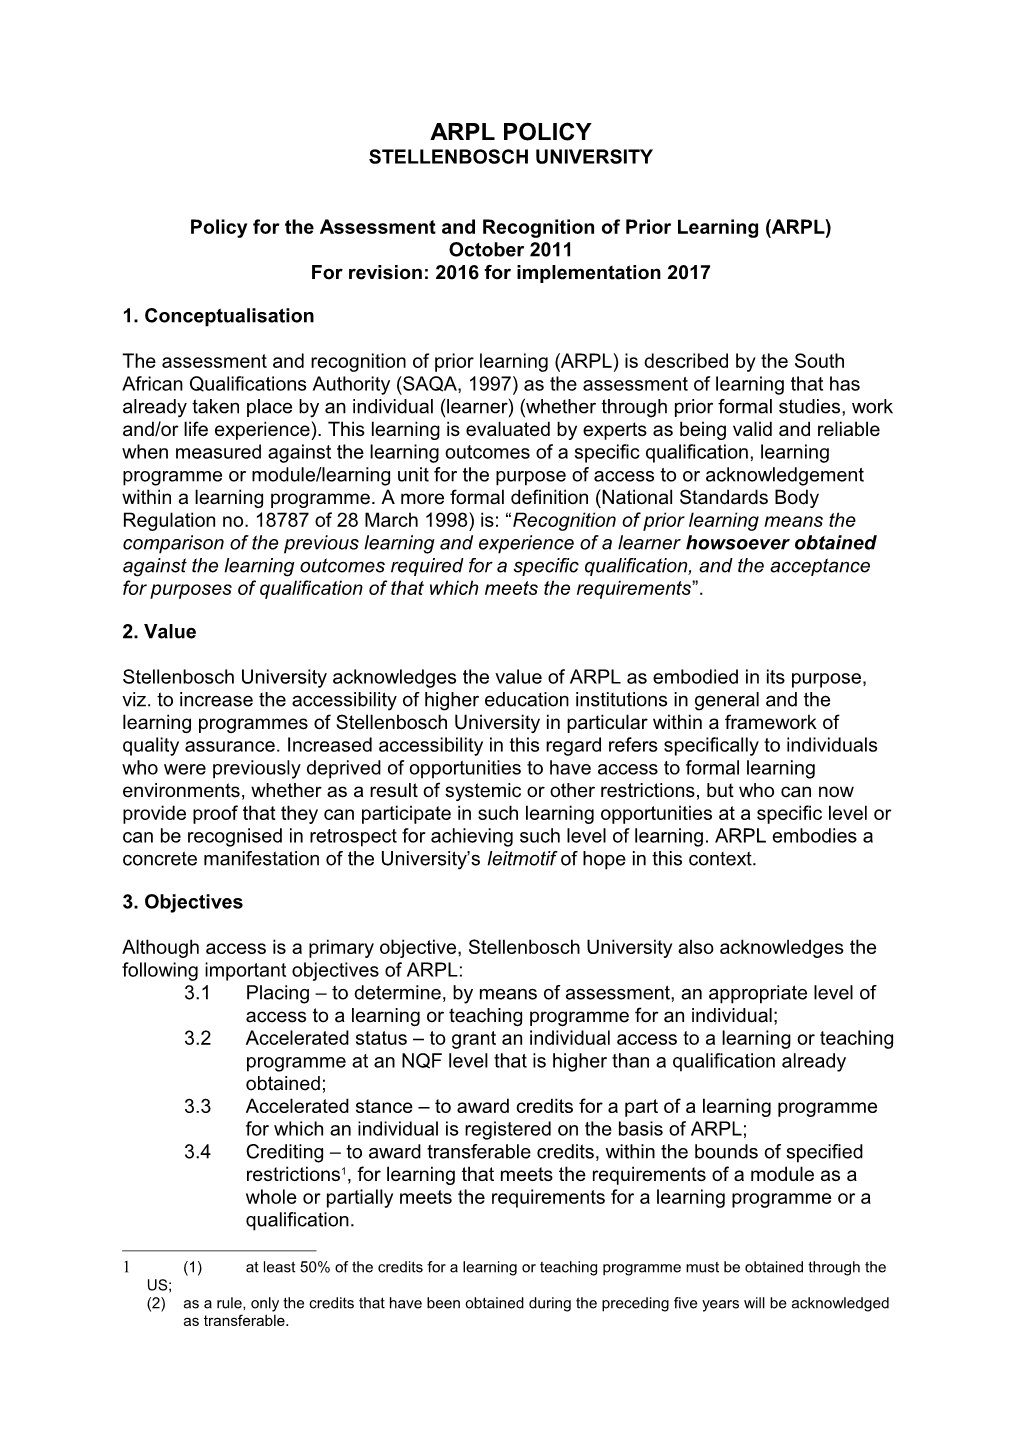 Policy for the Assessment and Recognition of Prior Learning (ARPL)